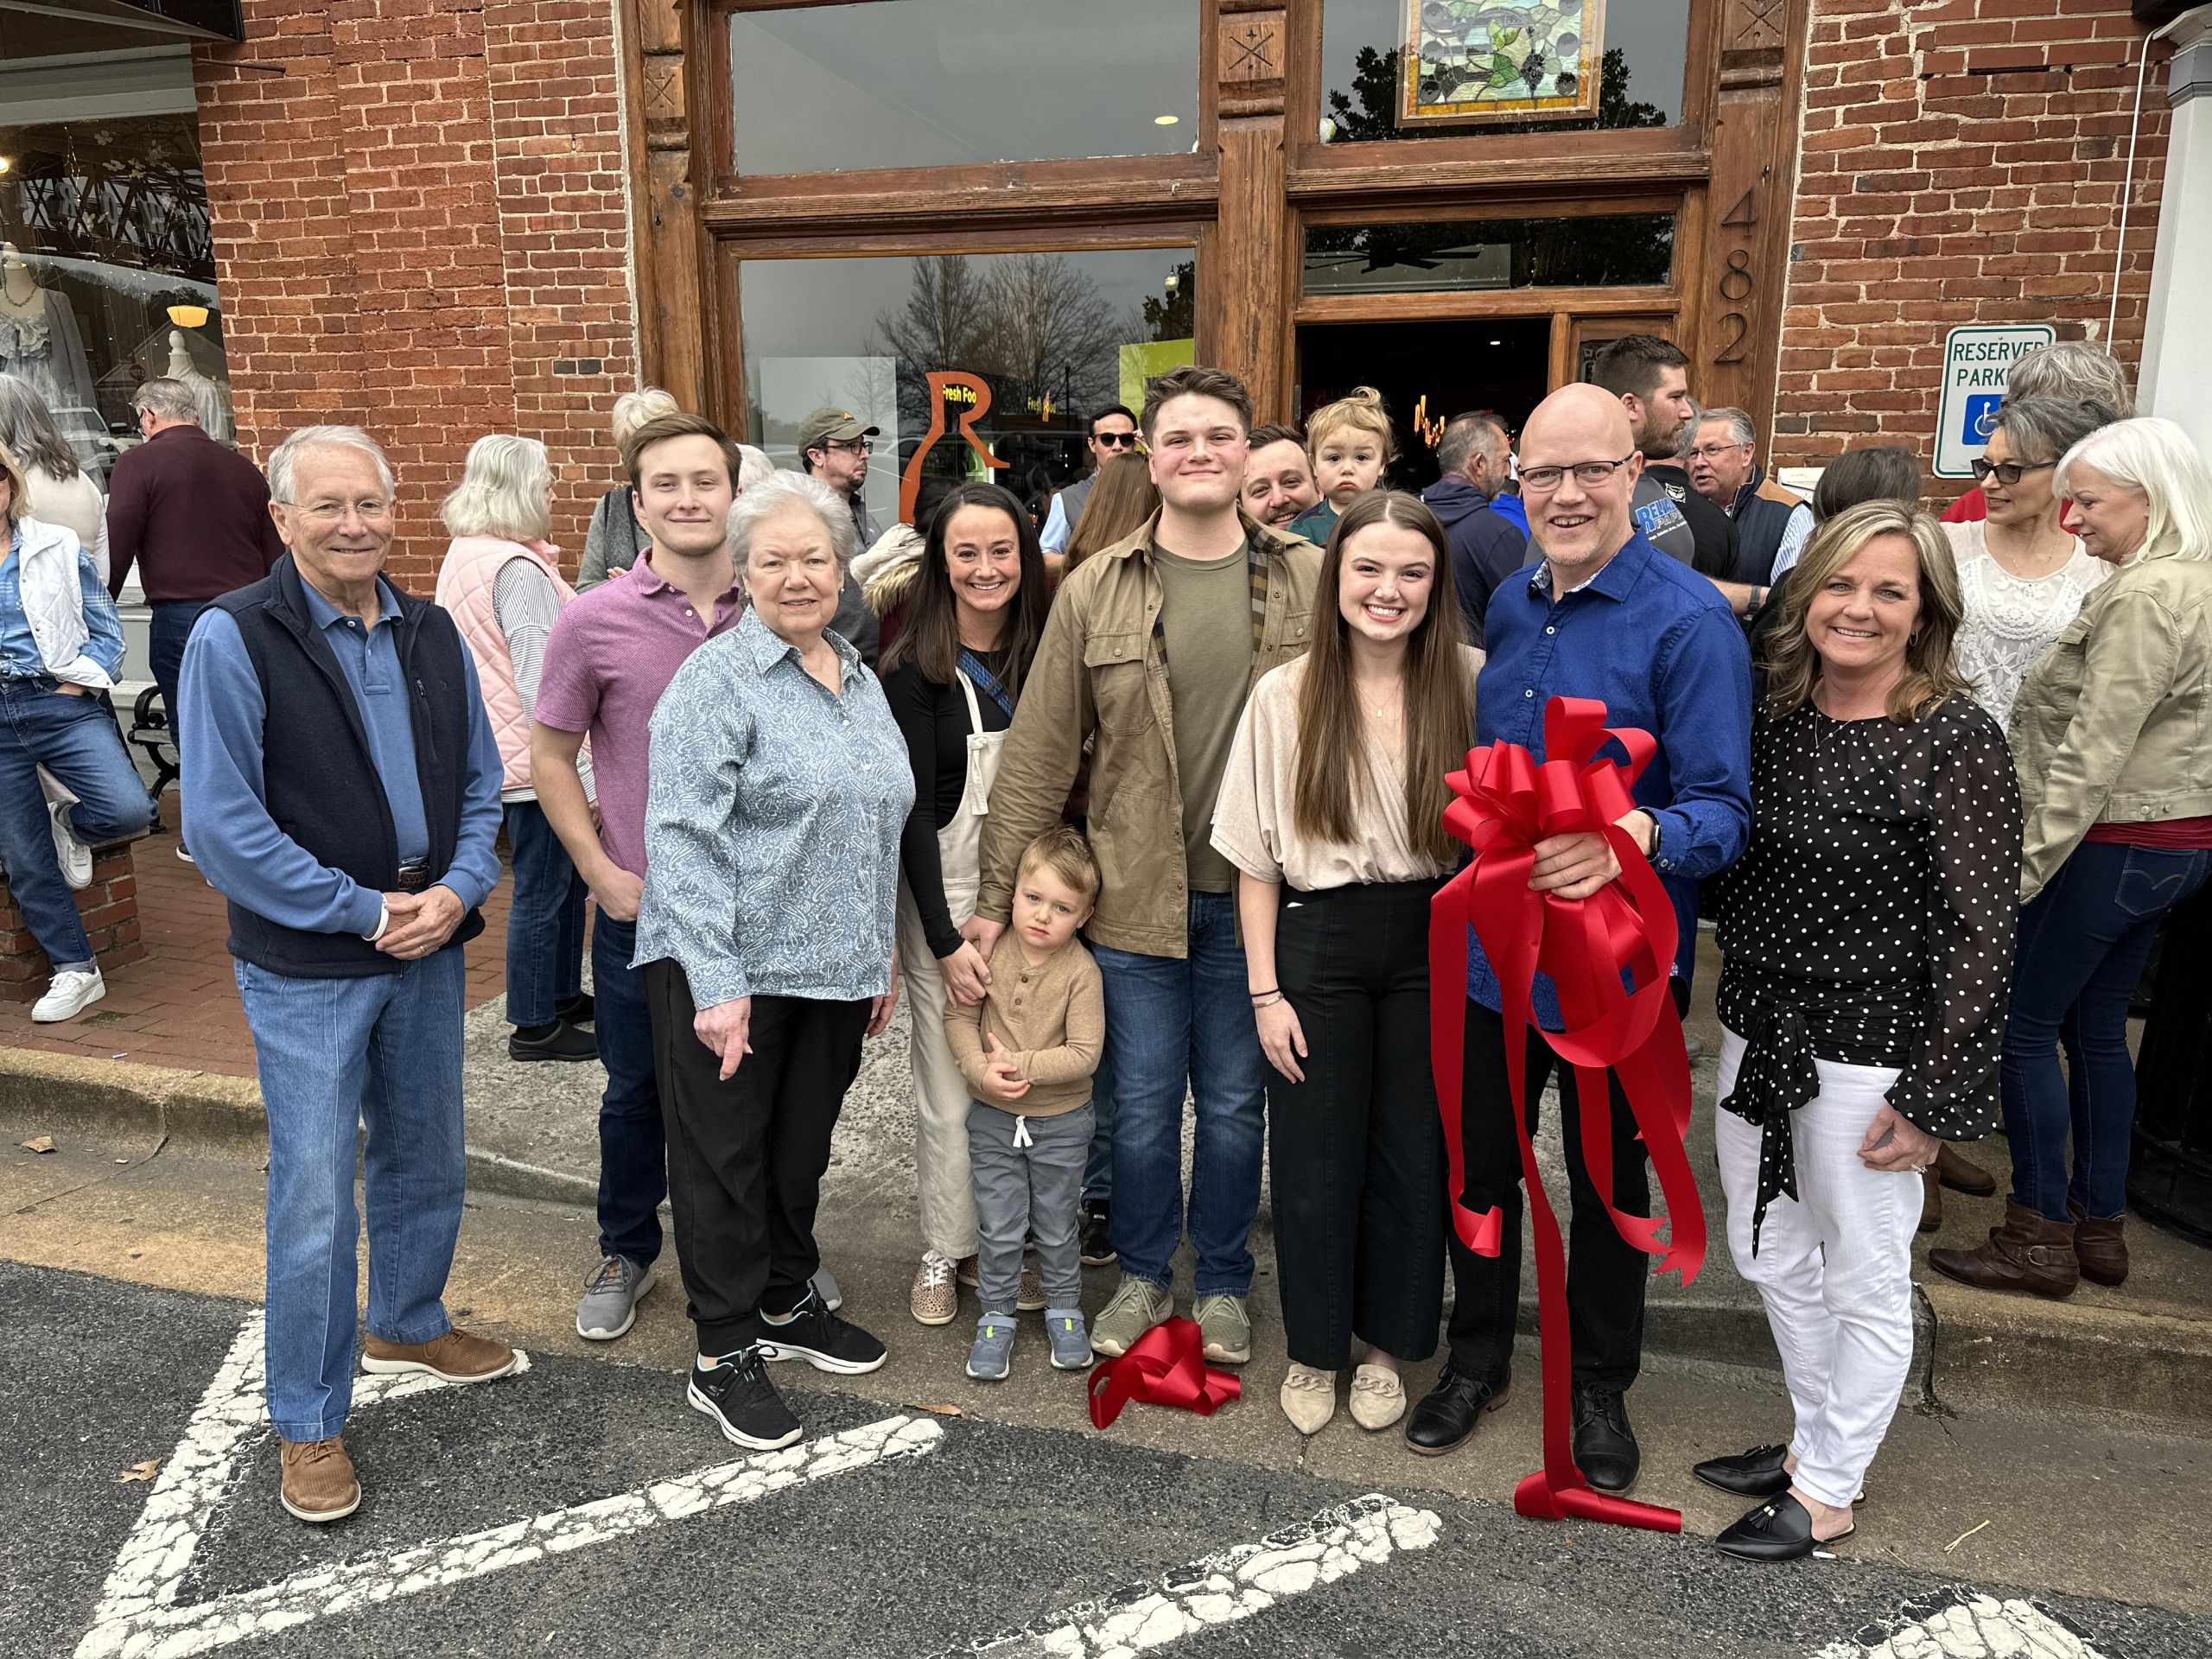 Image Toby Carmichael and Family with Mayor Allegood at TRG Vino Market Ribbon Cutting